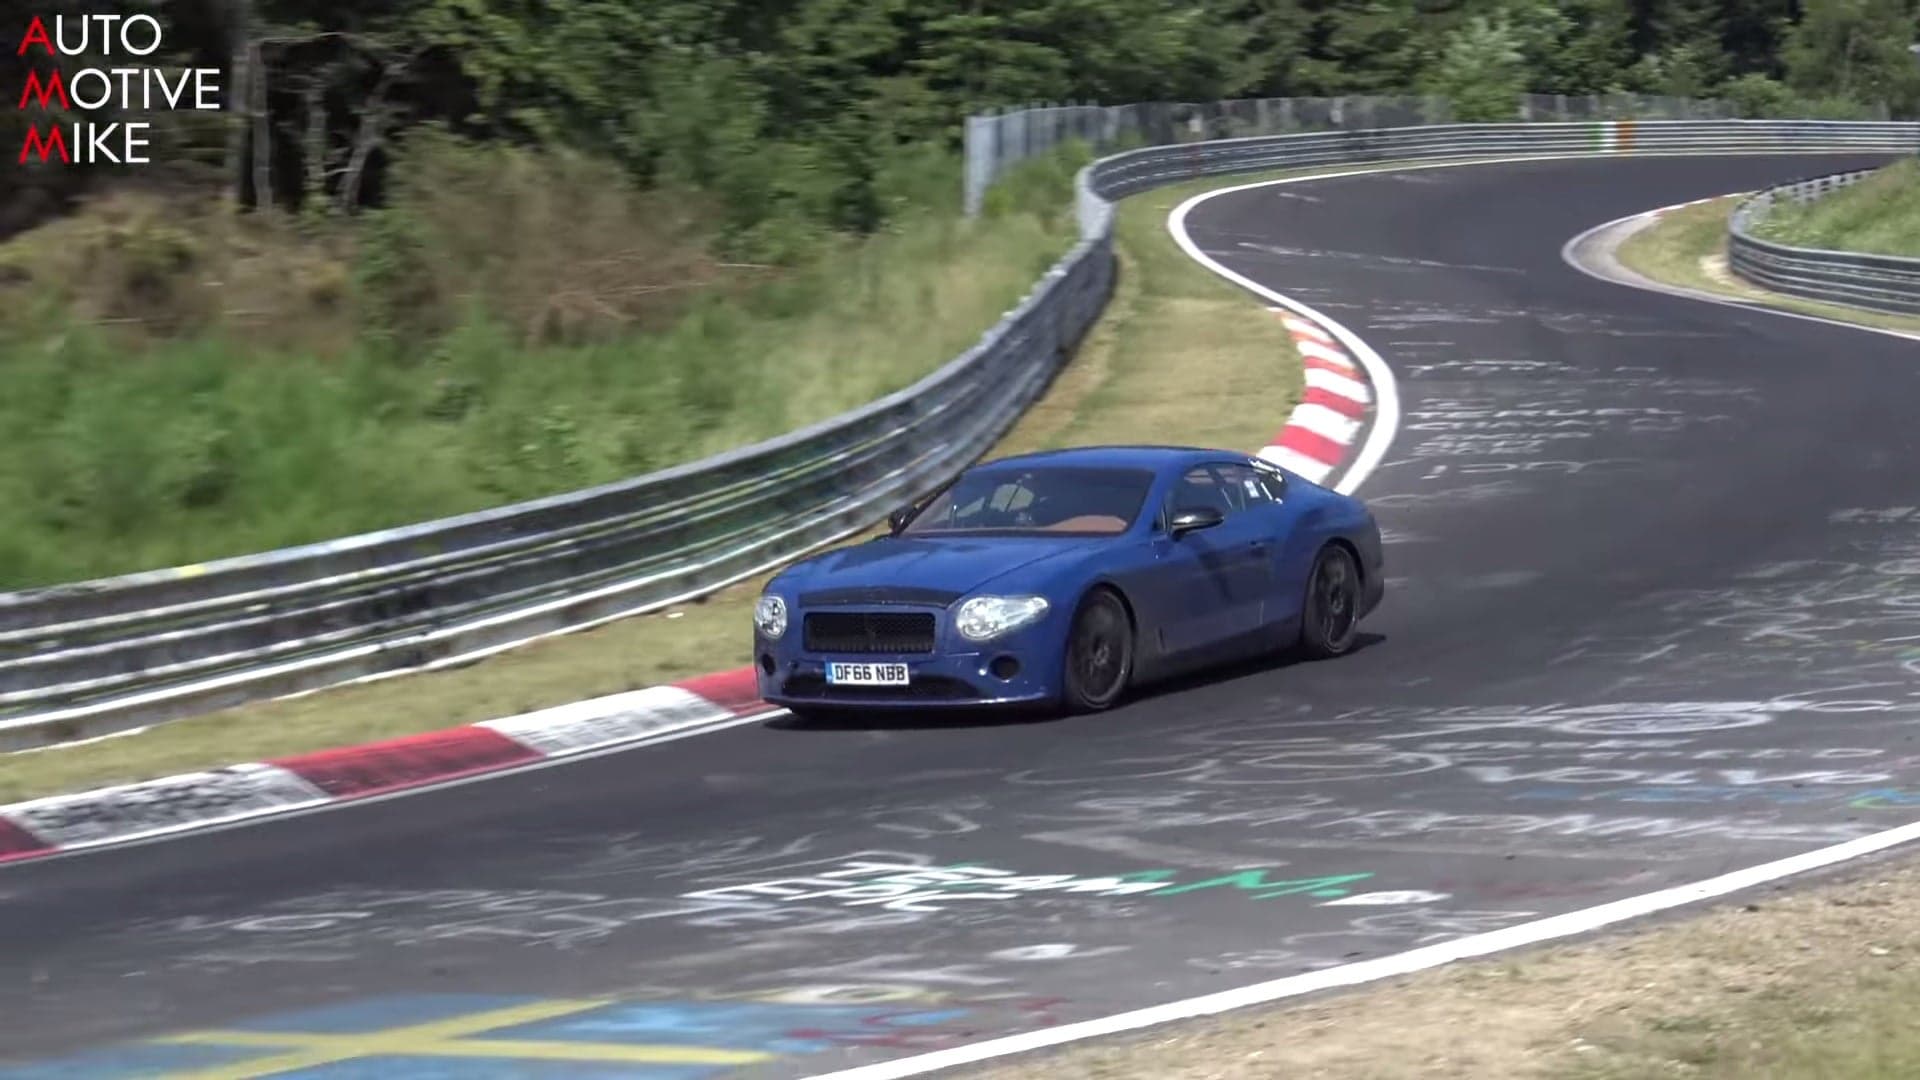 New Bentley Continental GT Spotted Testing on the Nurburgring